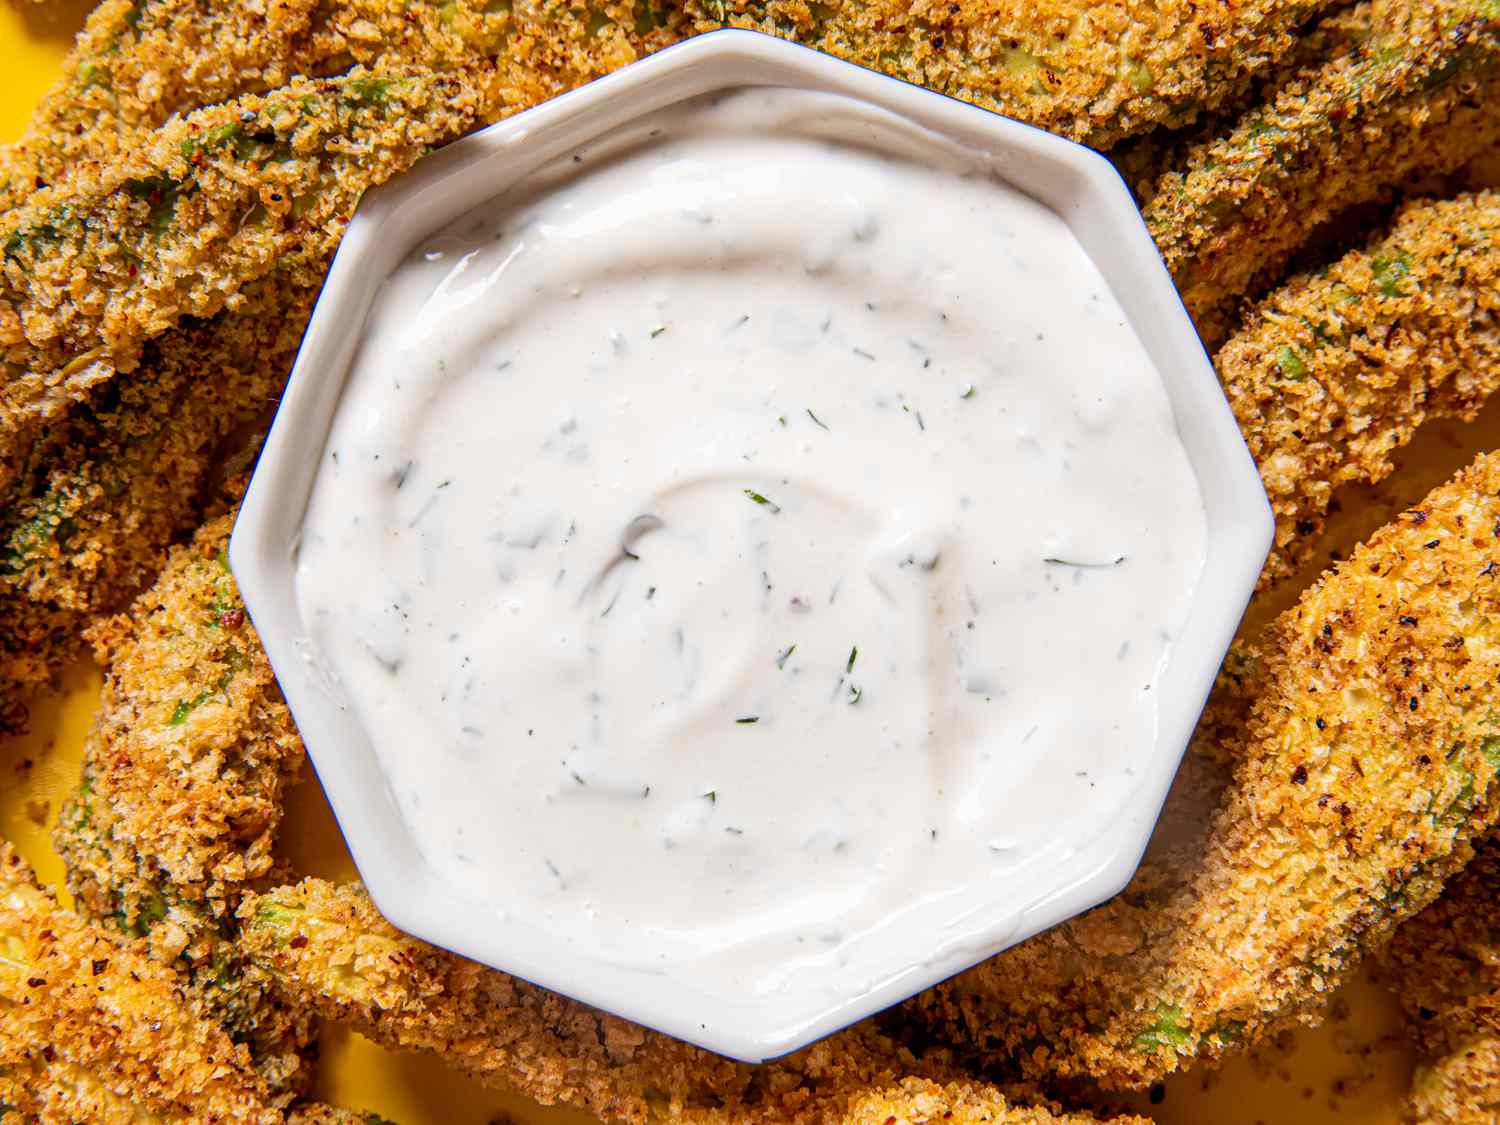 OVerhead view of ranch dressing